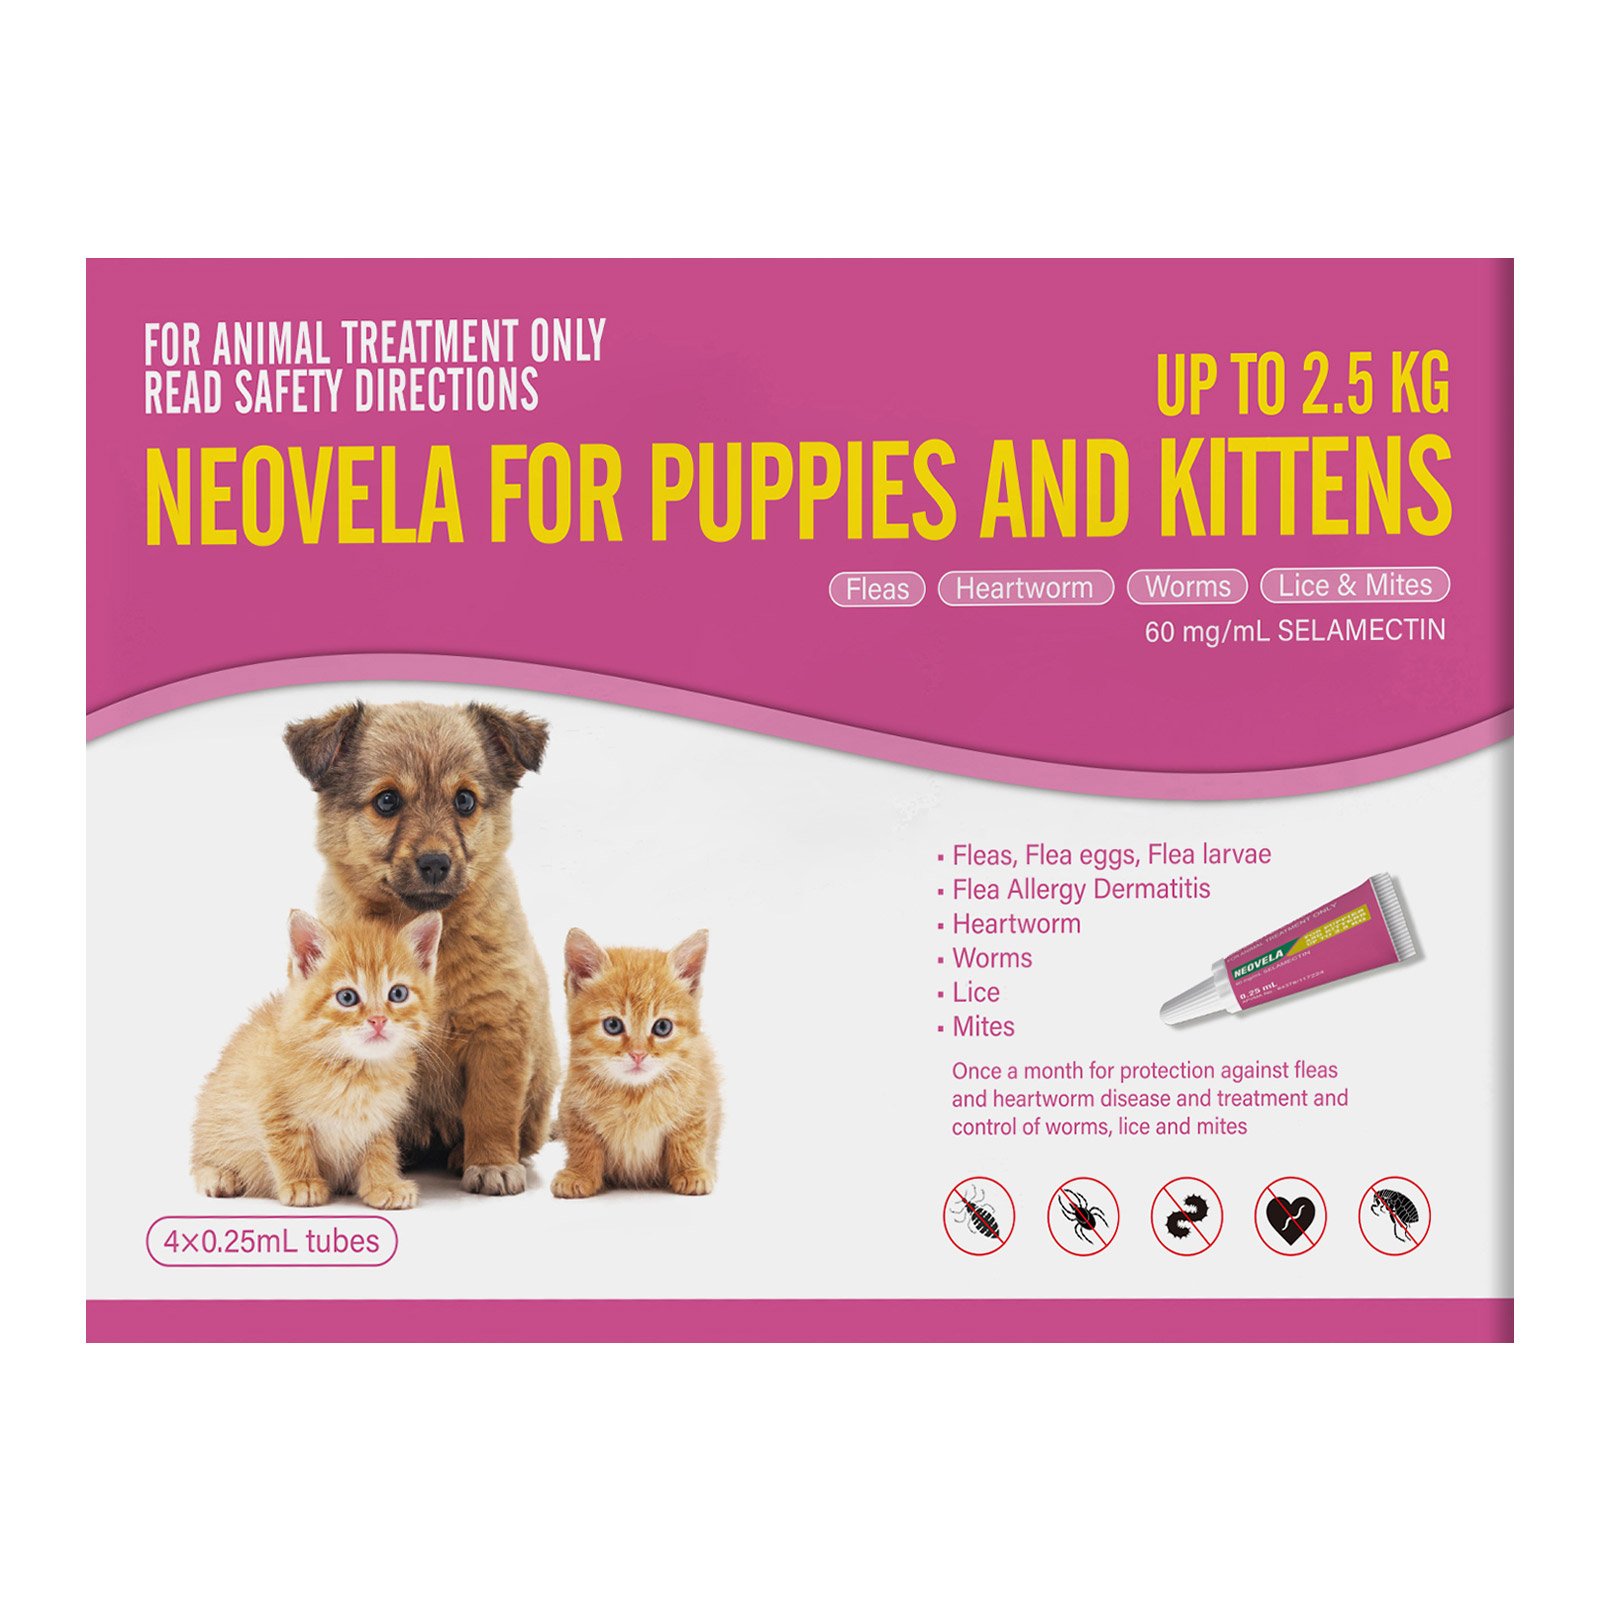 Neovela-for-puppies-and-kittens-up-to-2.5kg_08102023_043347.jpg